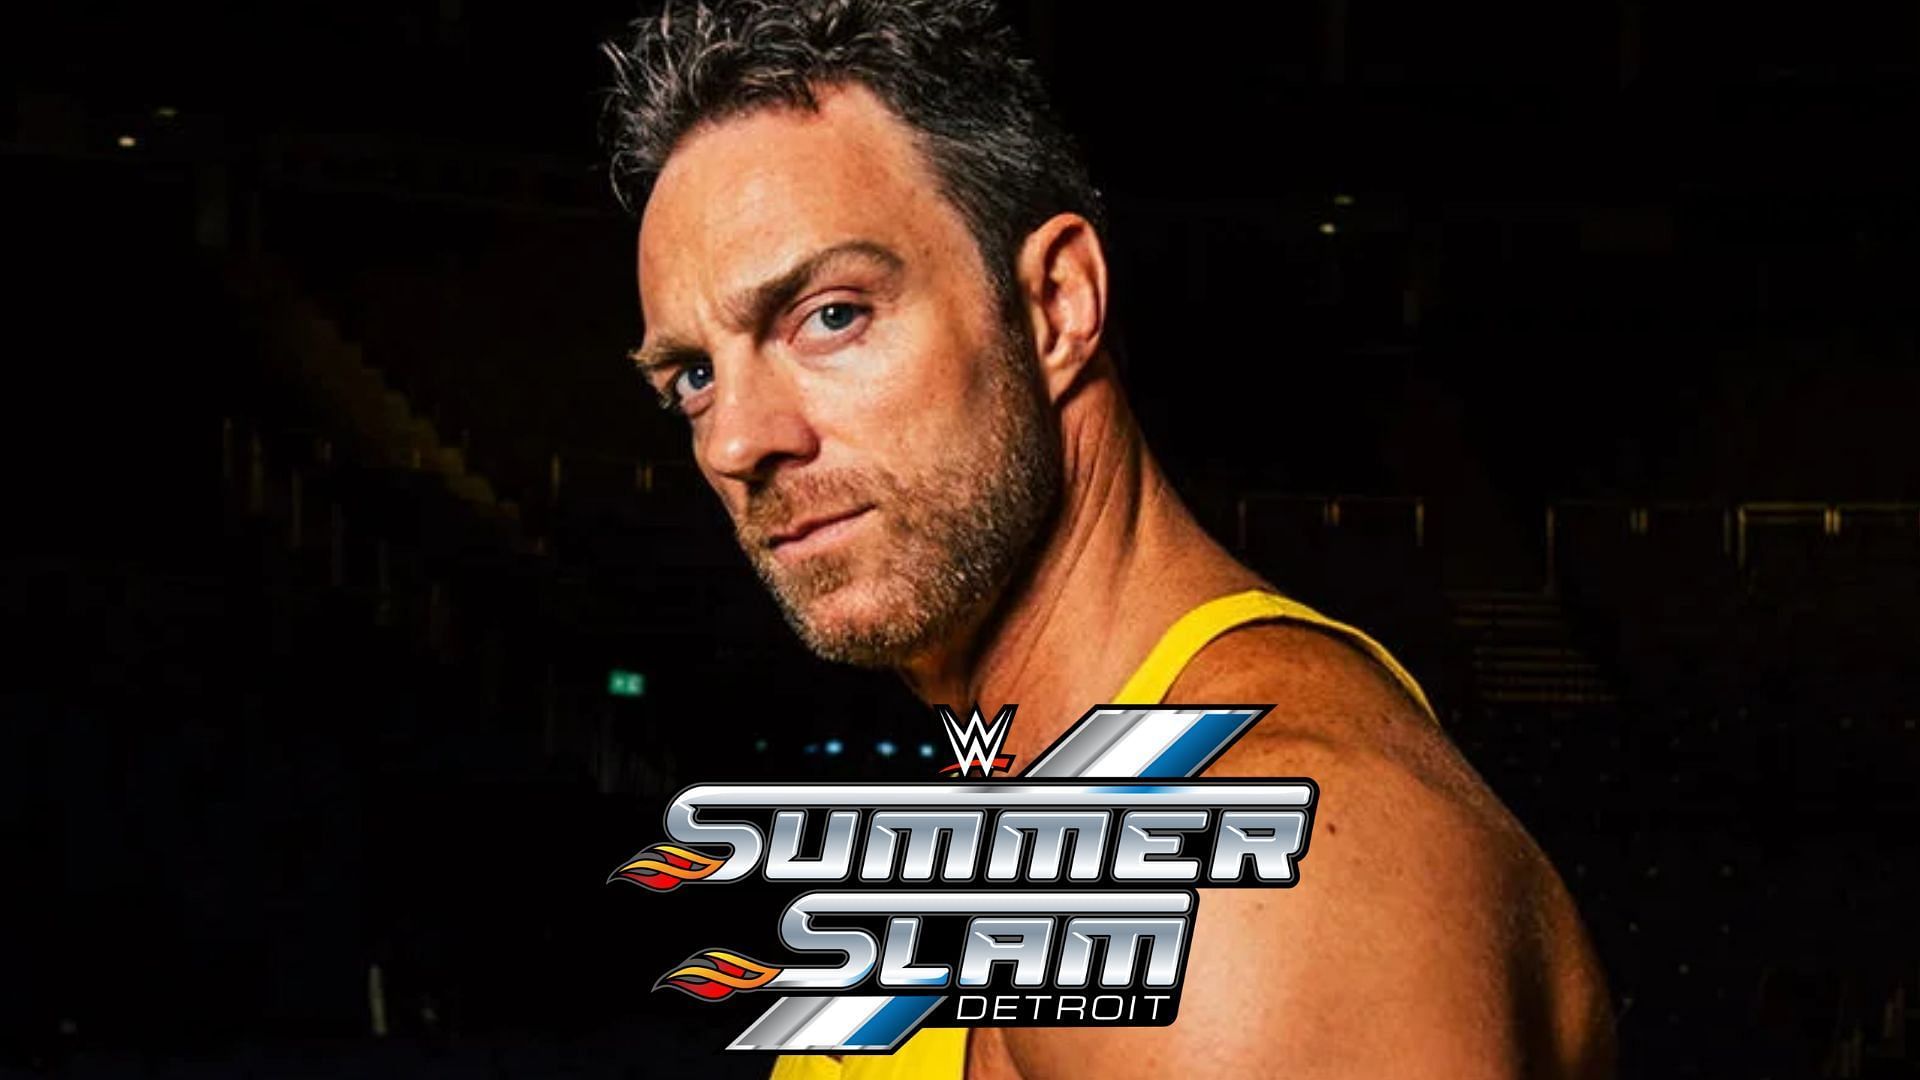 LA Knight is scheduled to compete at WWE SummerSlam